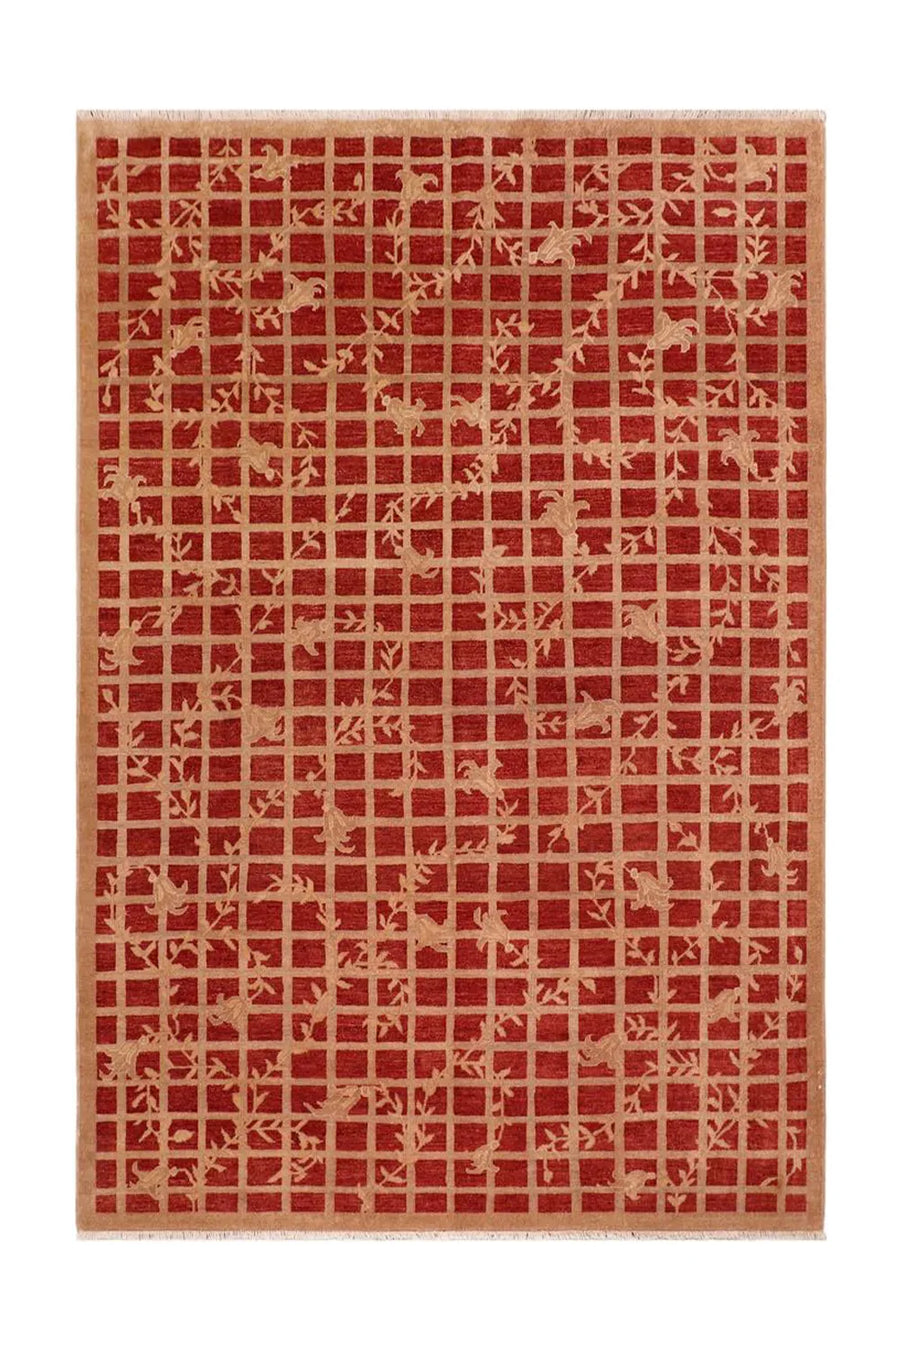 Hand-knotted red and brown wool rug with a subtle grid pattern.